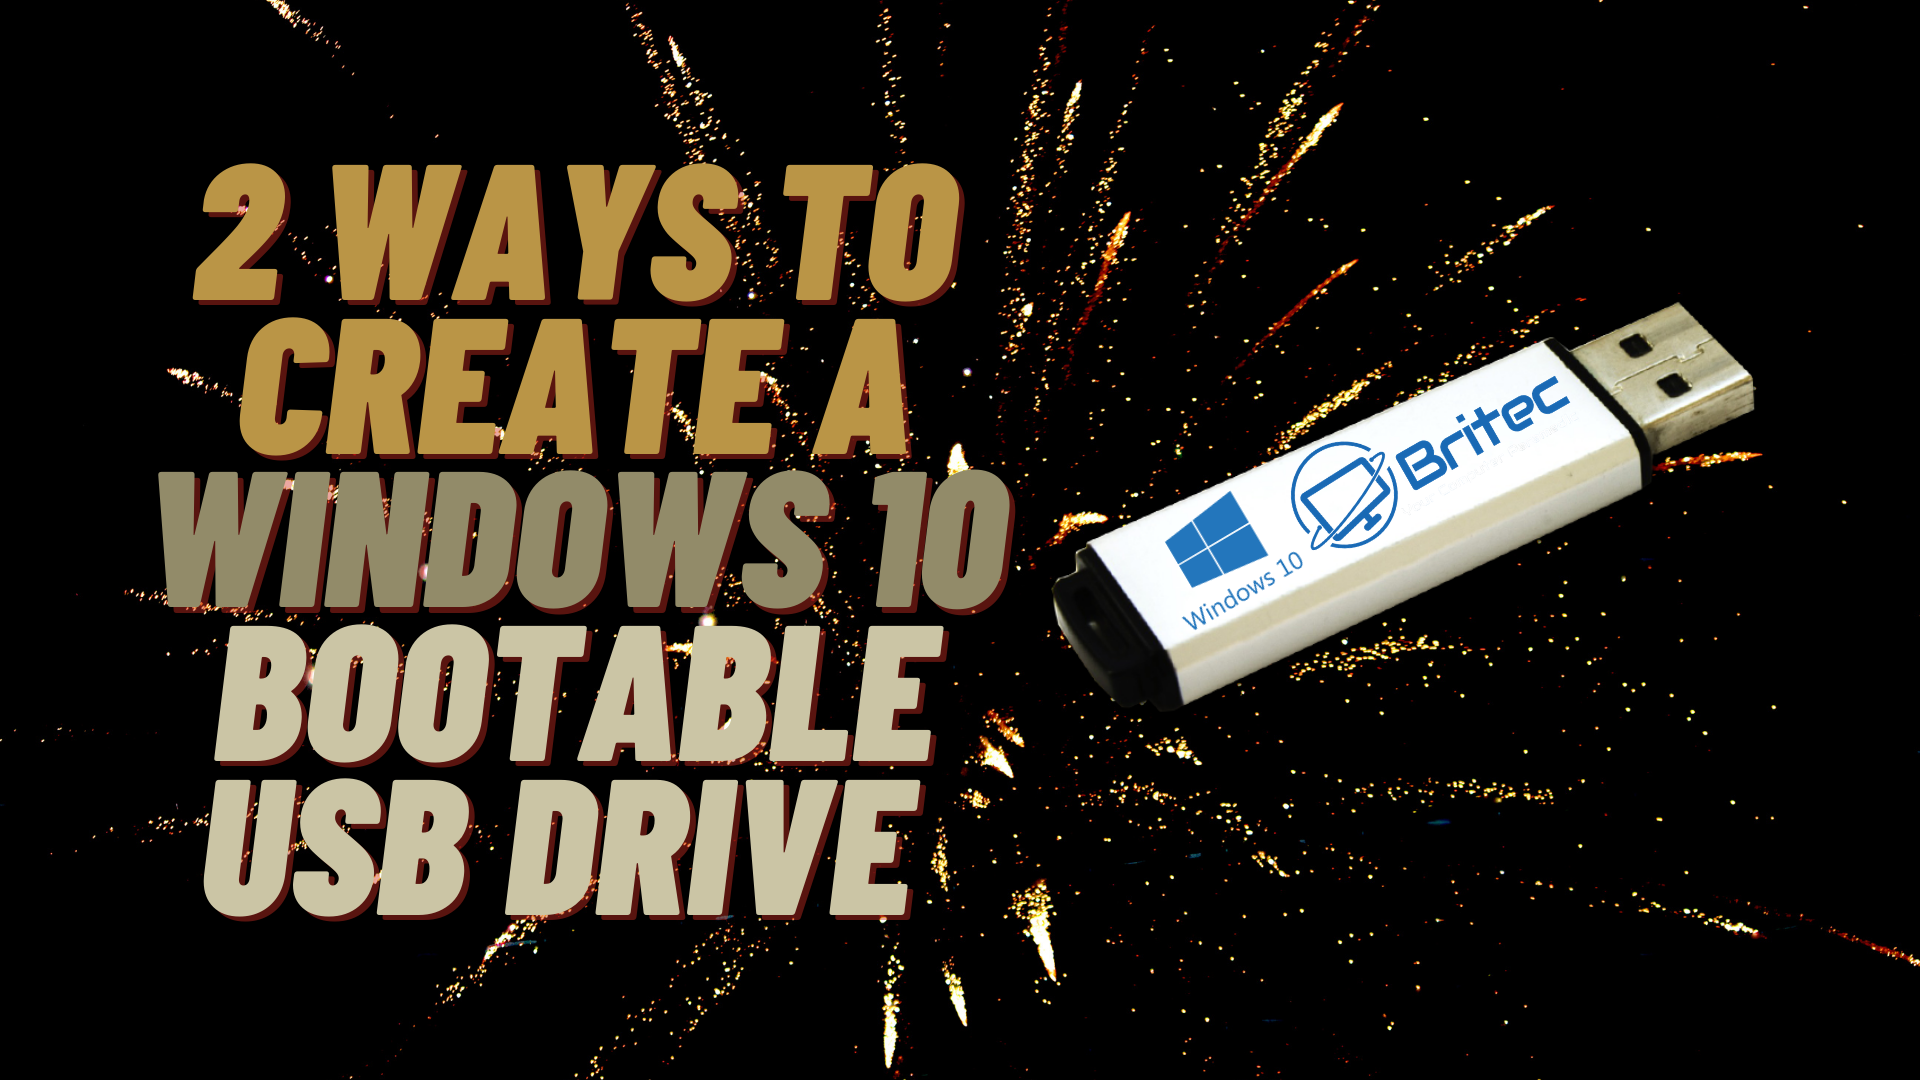 usb bootable software free download for all windows 10